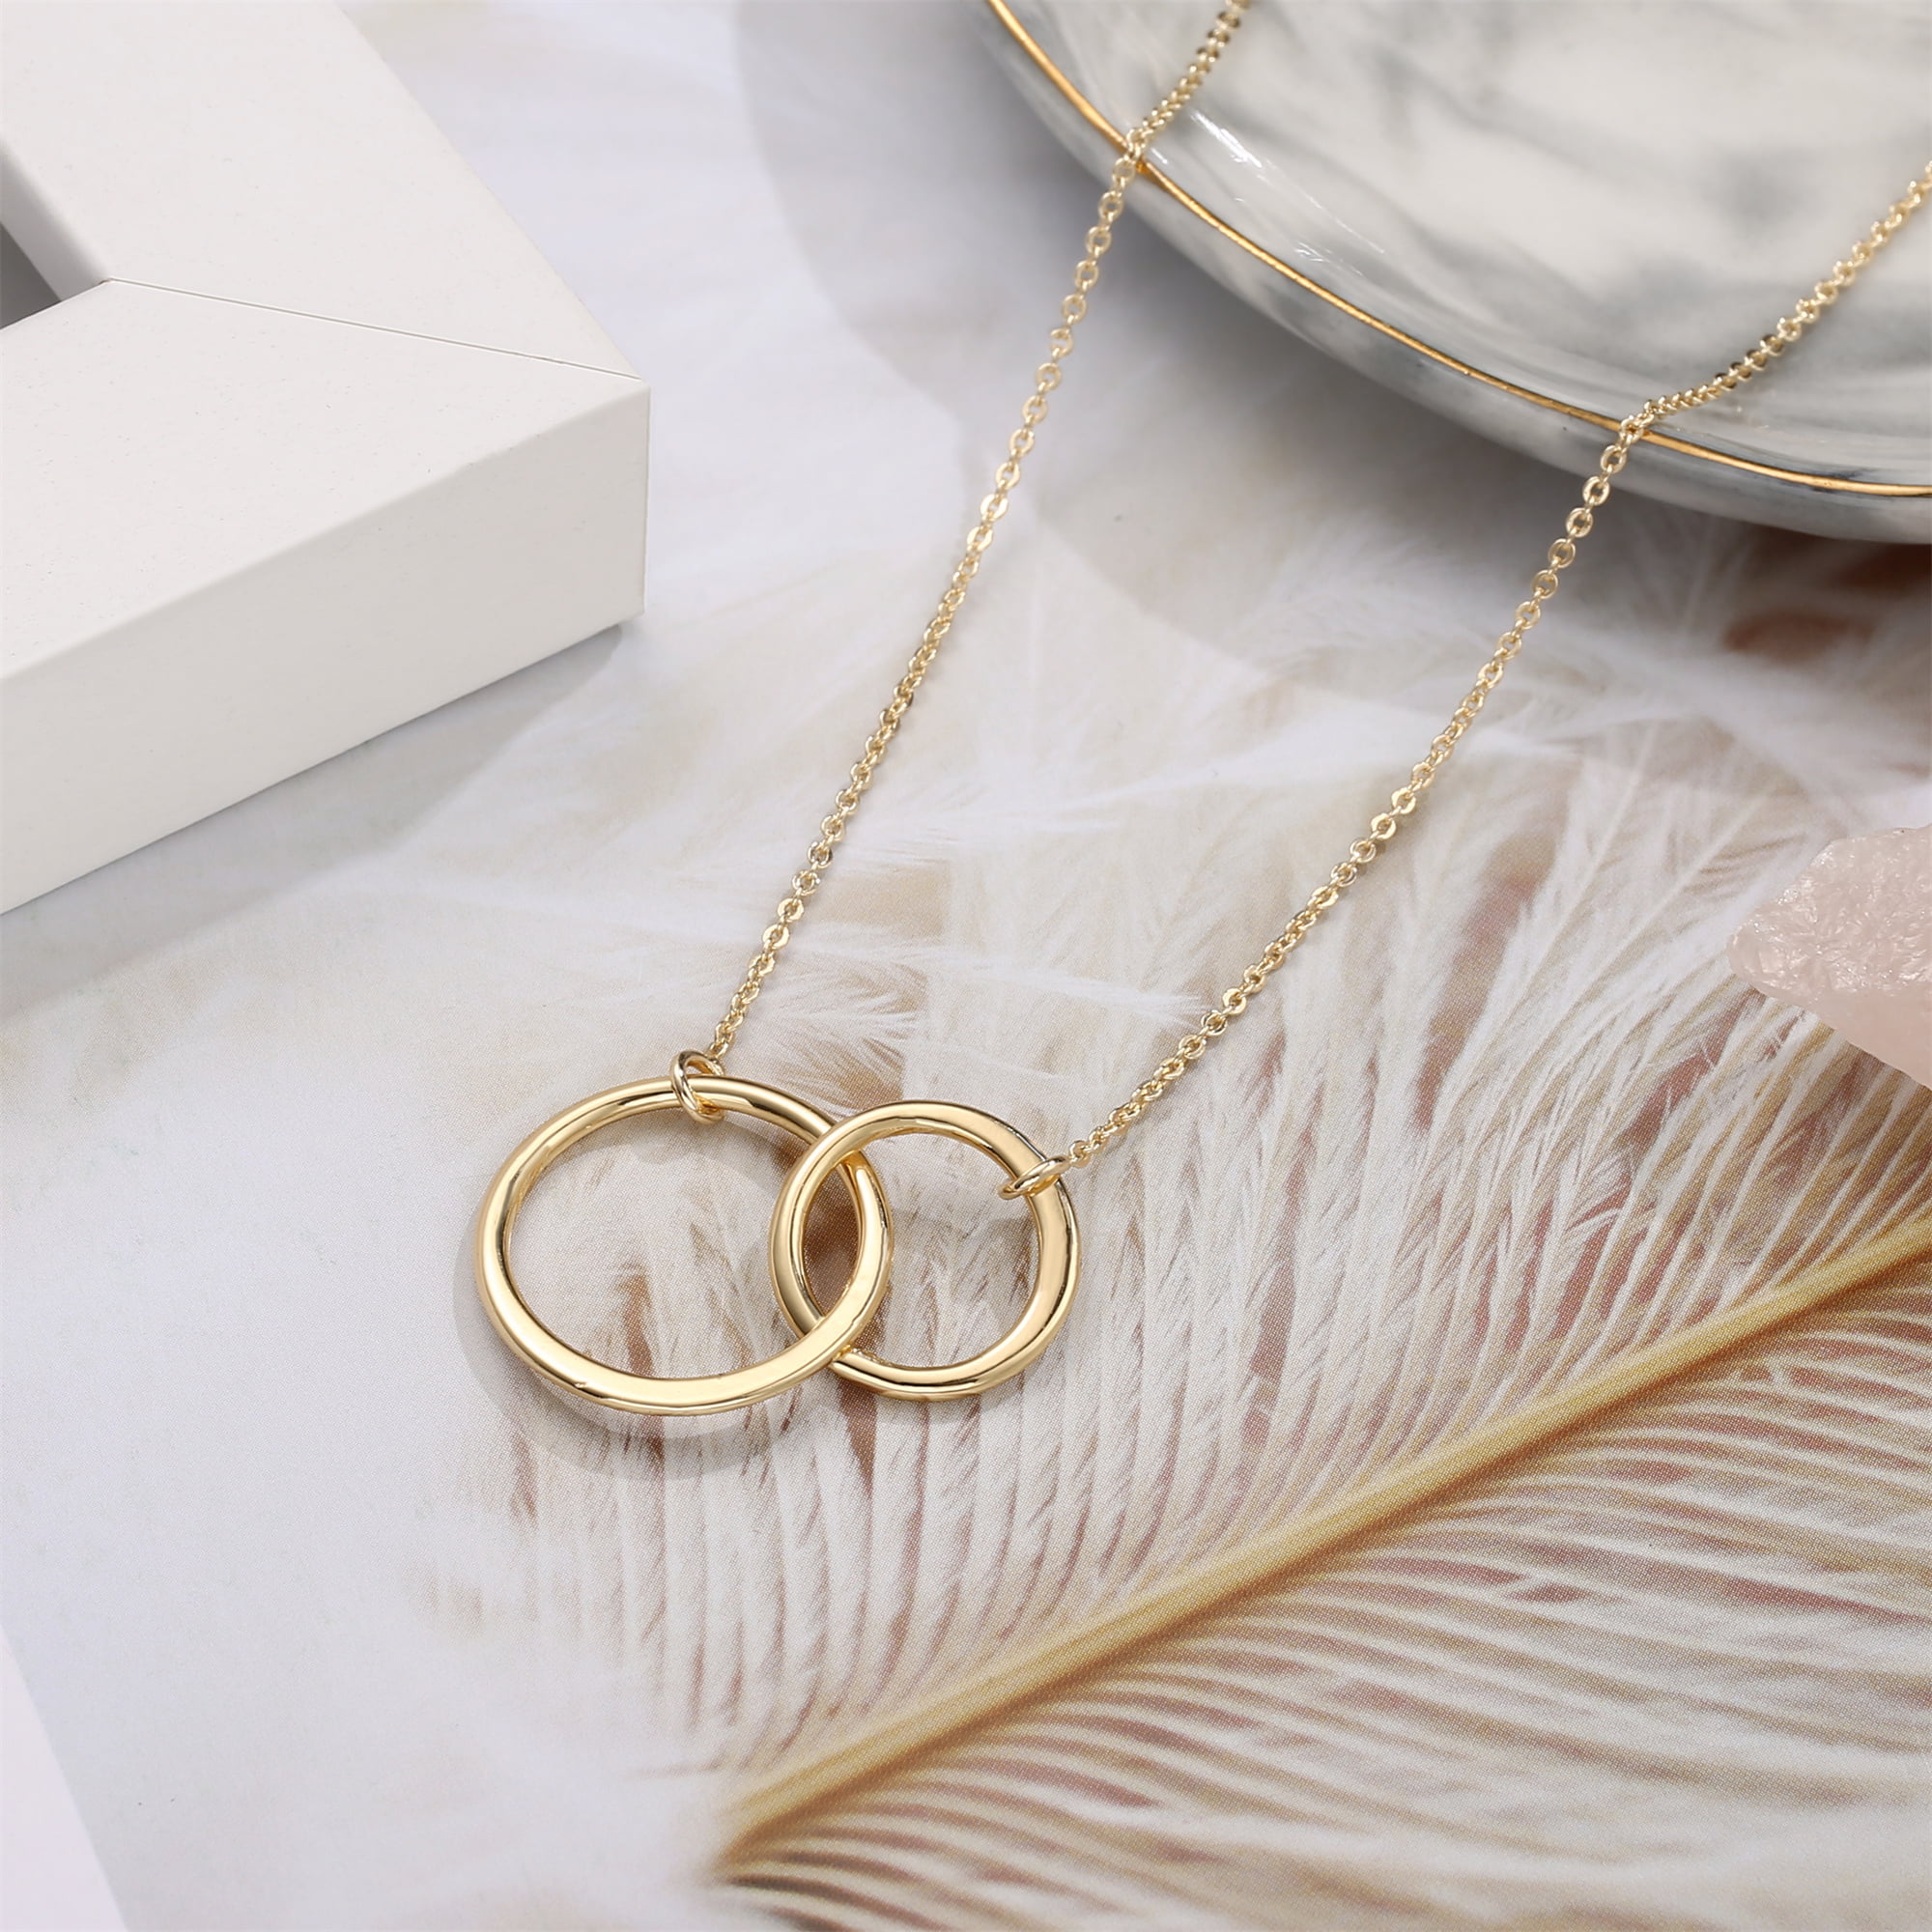 Buy Mini Interlocking Circles Necklace Mother Daughter Gift Bff Necklace  Dainty Entwined Circles Necklace Gold Circle Necklace Online in India - Etsy